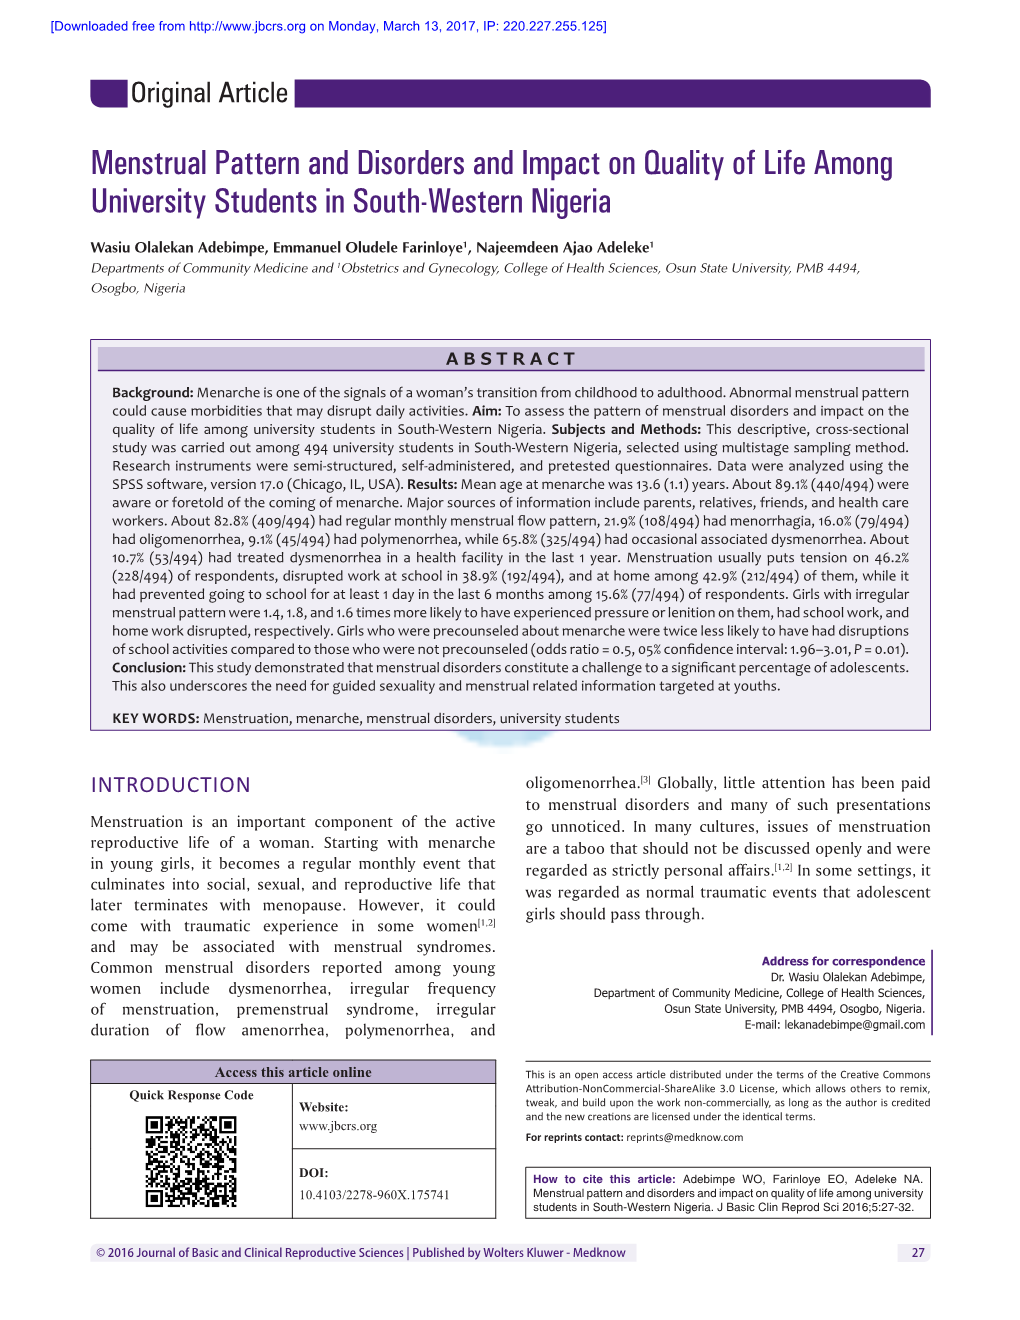 Menstrual Pattern and Disorders and Impact on Quality of Life Among University Students in South-Western Nigeria